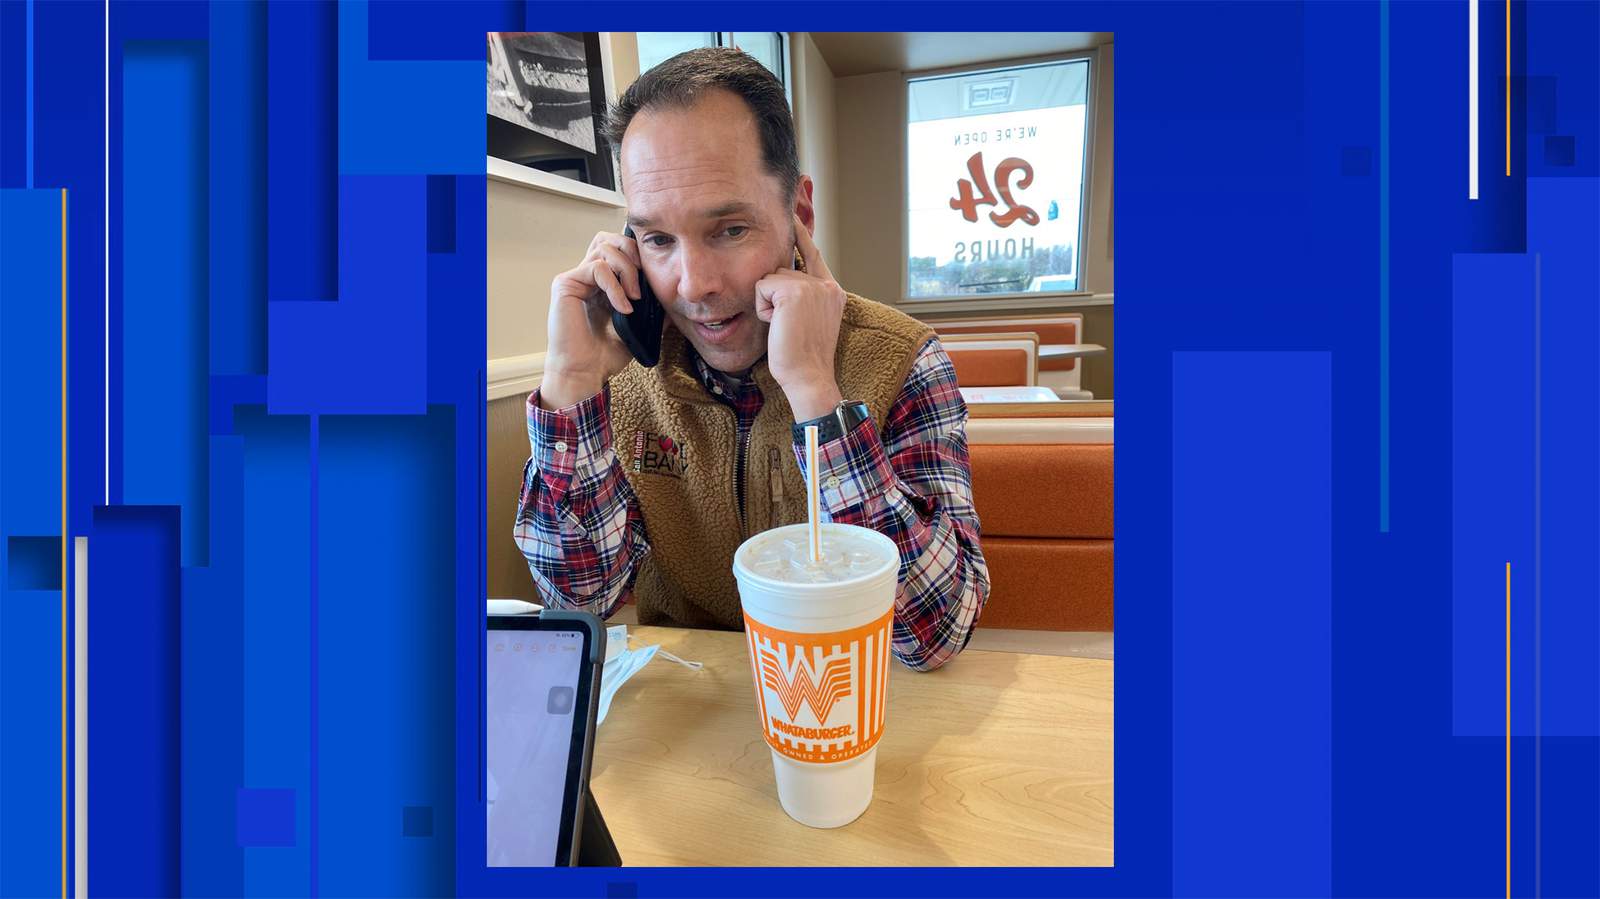 WATCH: SA Food Bank president and CEO takes call from White House at Whataburger